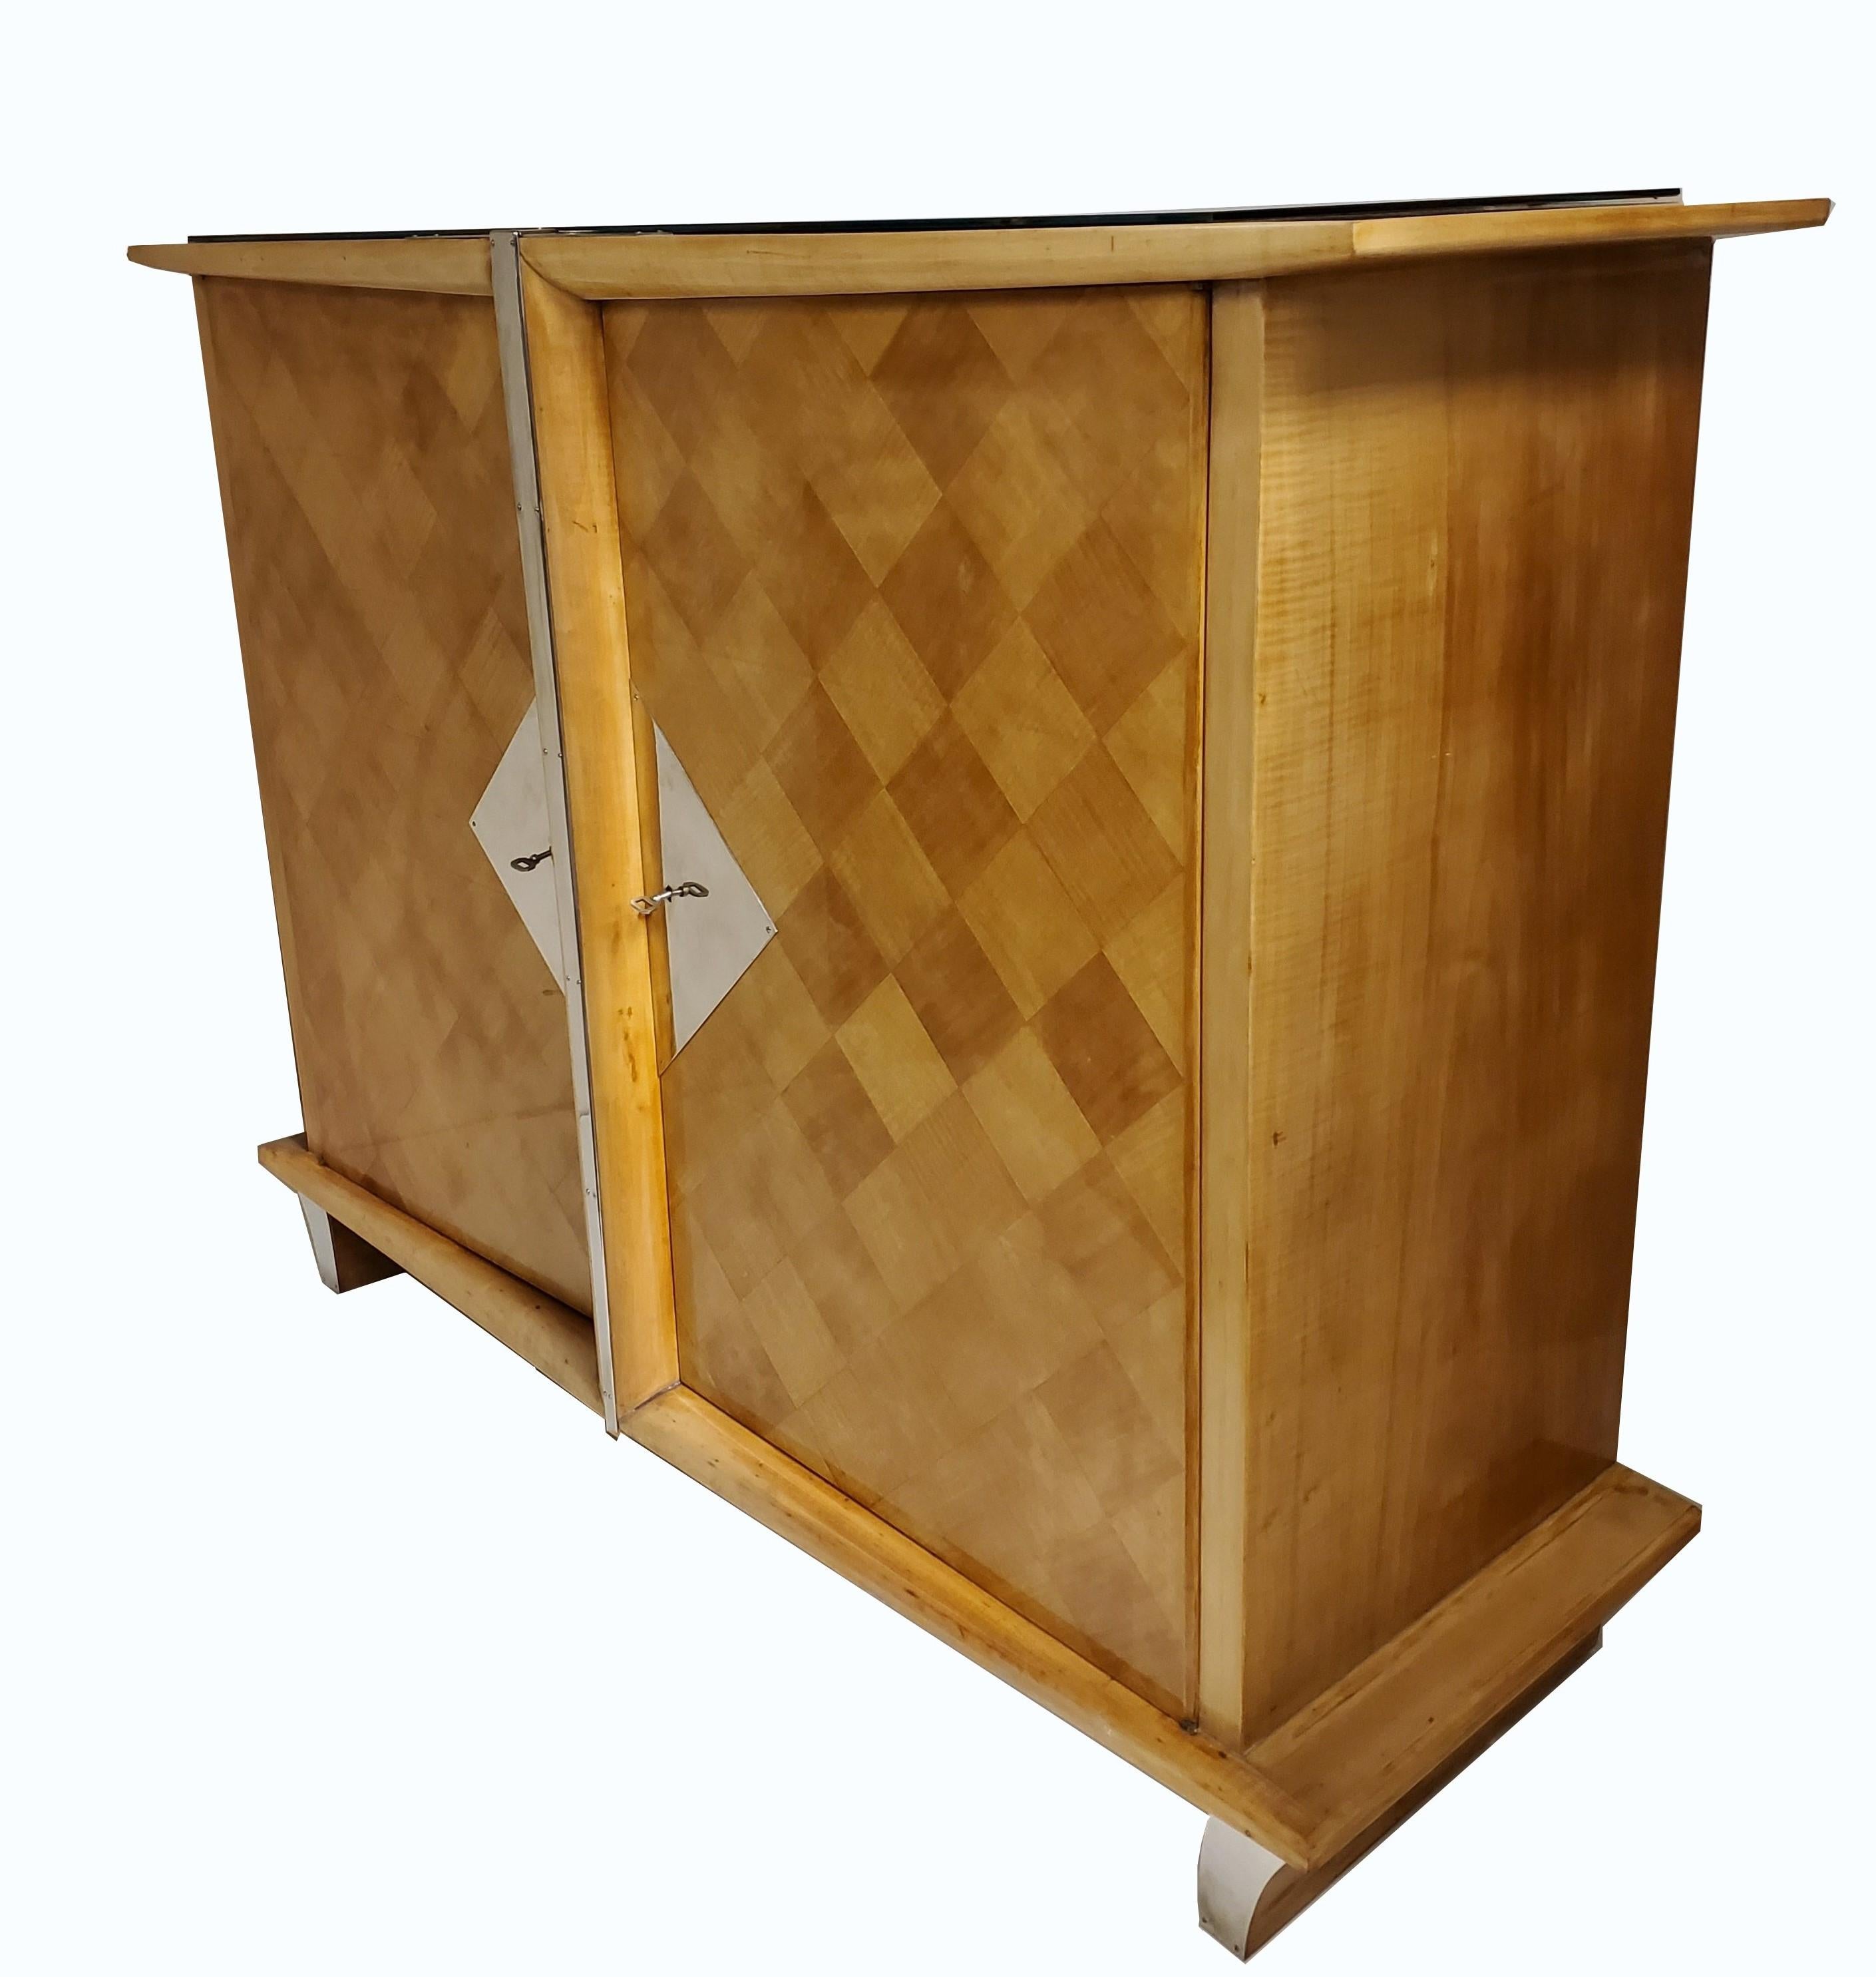 A French sycamore wood tall and versatile highboy / wardrobe/ cabinet. 
Its geometric parquetry inlaid front adds a touch of elegance with patterns of diamonds and cubes. This sculptural cabinet is adorned with an artistic tapered molding that